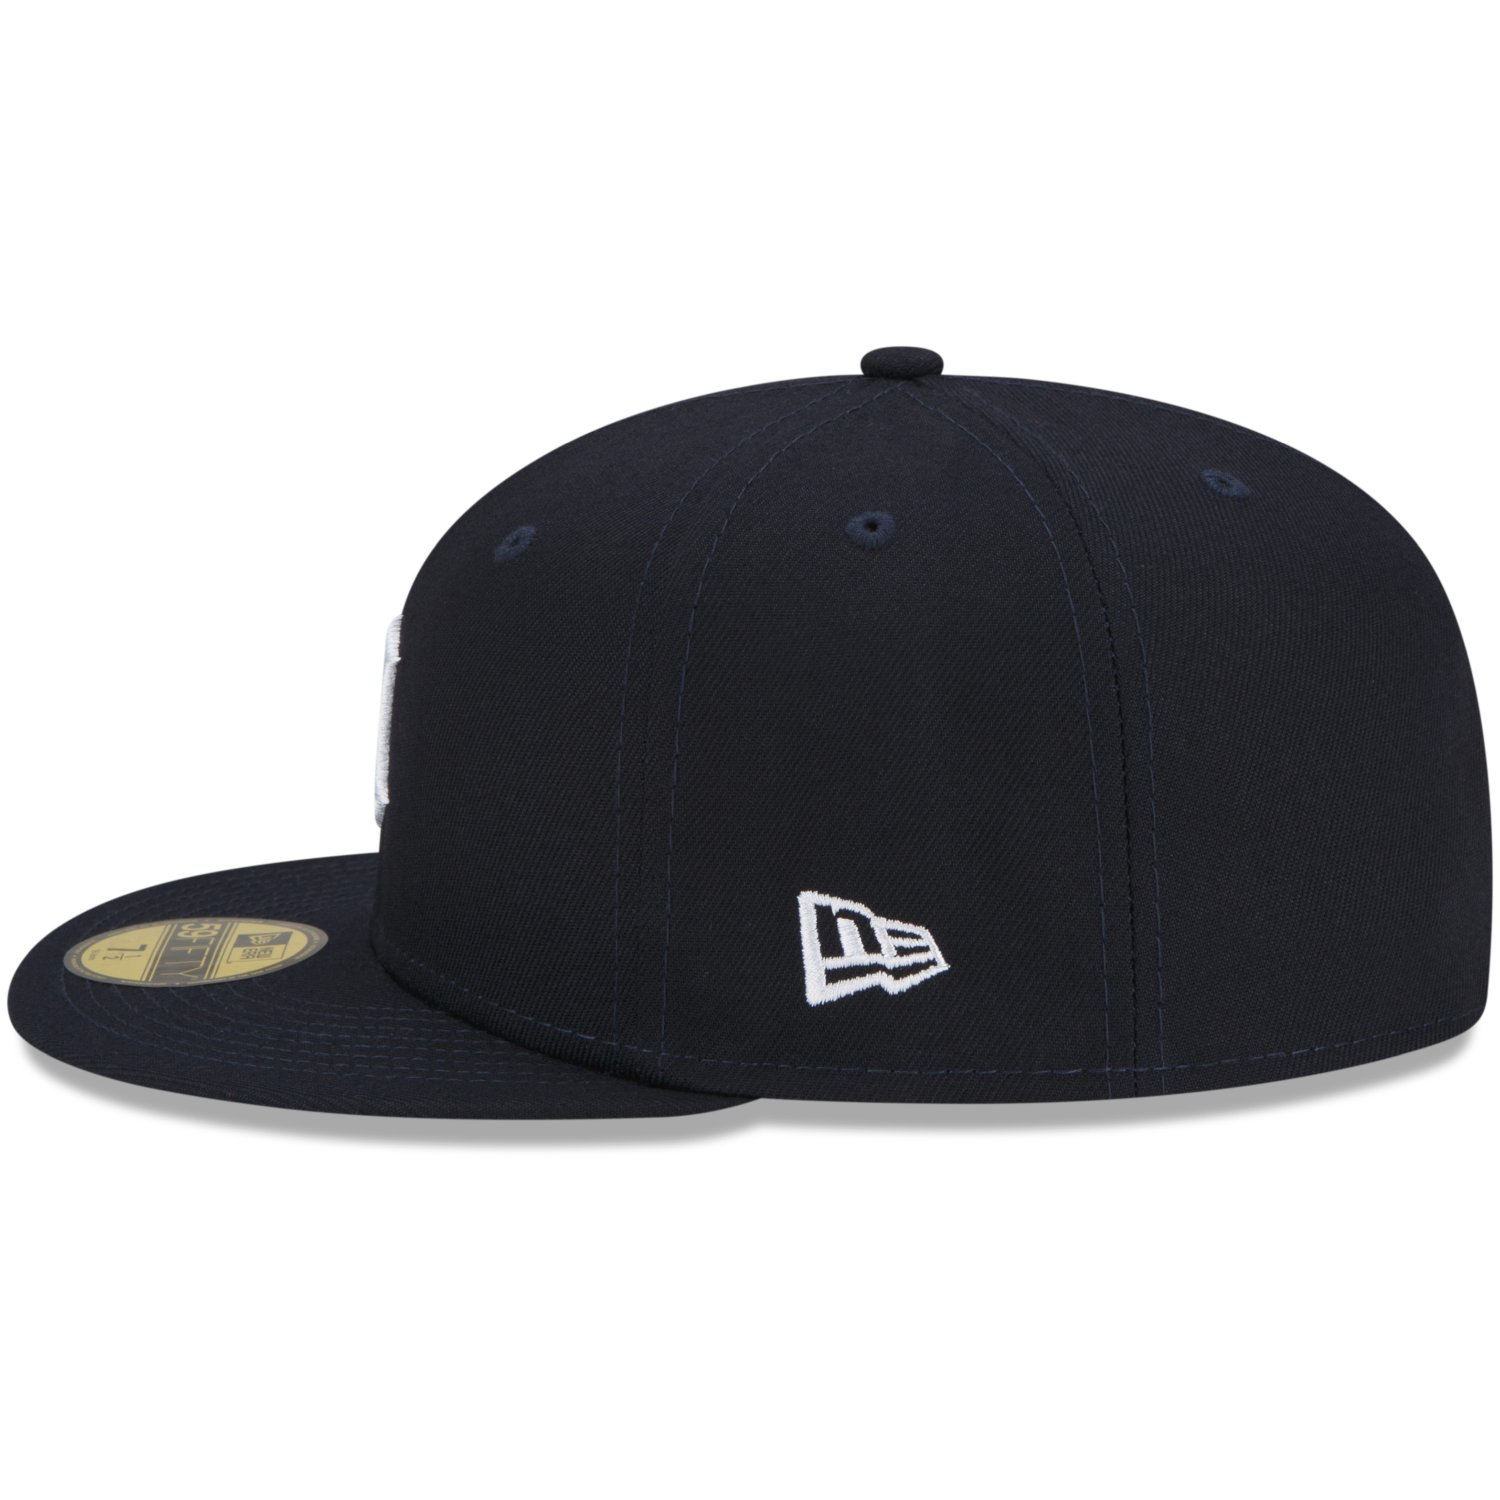 New Era 59Fifty Fitted Cap - CITY CLUSTER Detroit Tigers | Fitted ...